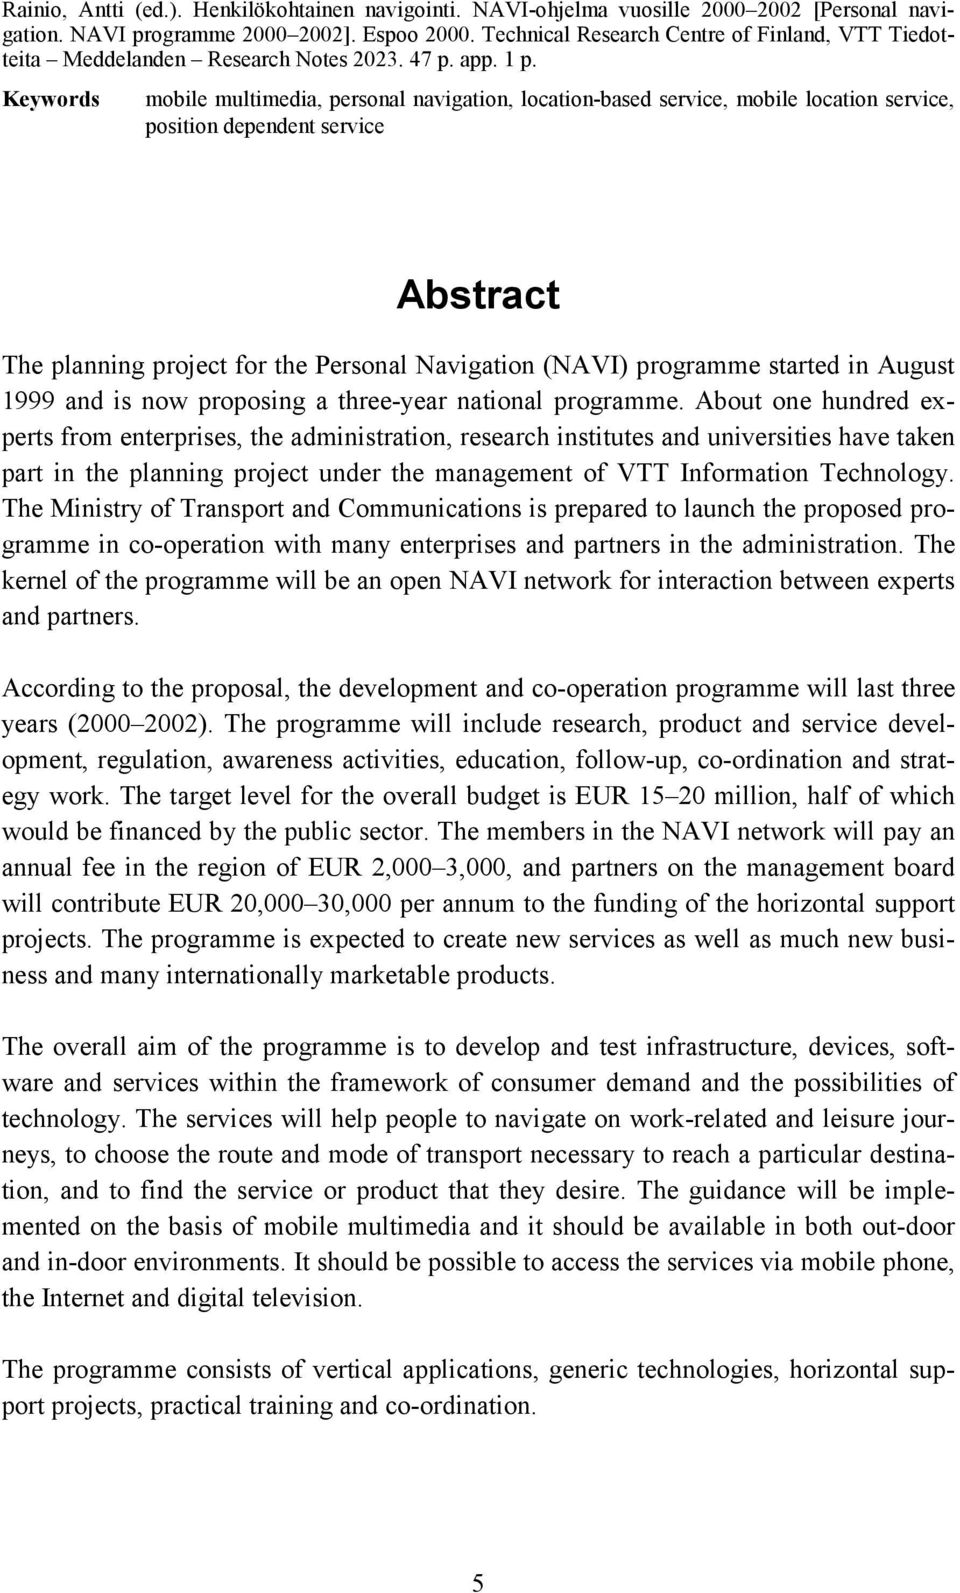 Keywords mobile multimedia, personal navigation, location-based service, mobile location service, position dependent service Abstract The planning project for the Personal Navigation (NAVI) programme